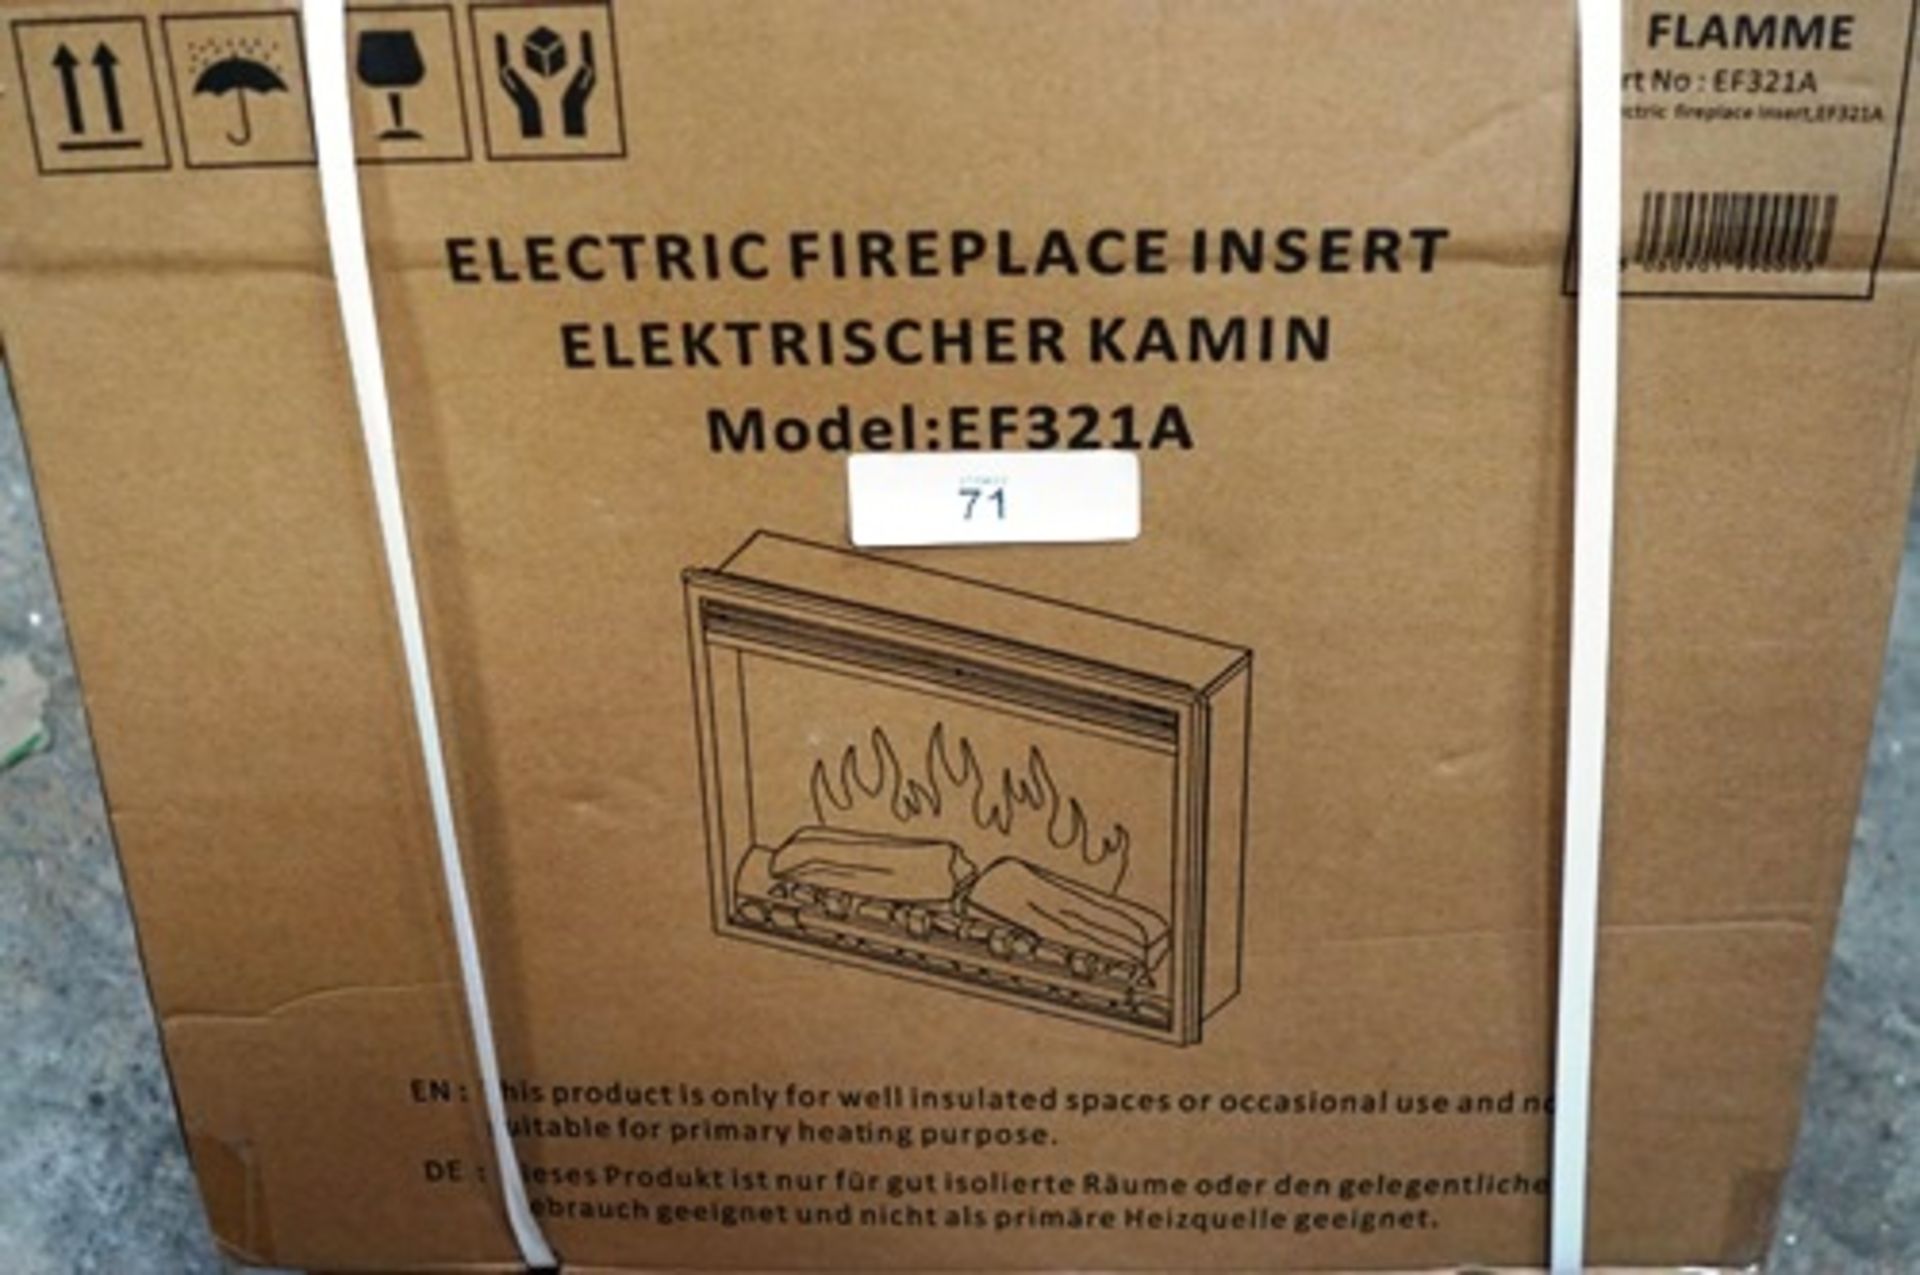 1 x Flamme electric fireplace insert, model EF321A - Sealed new in box (ES3)